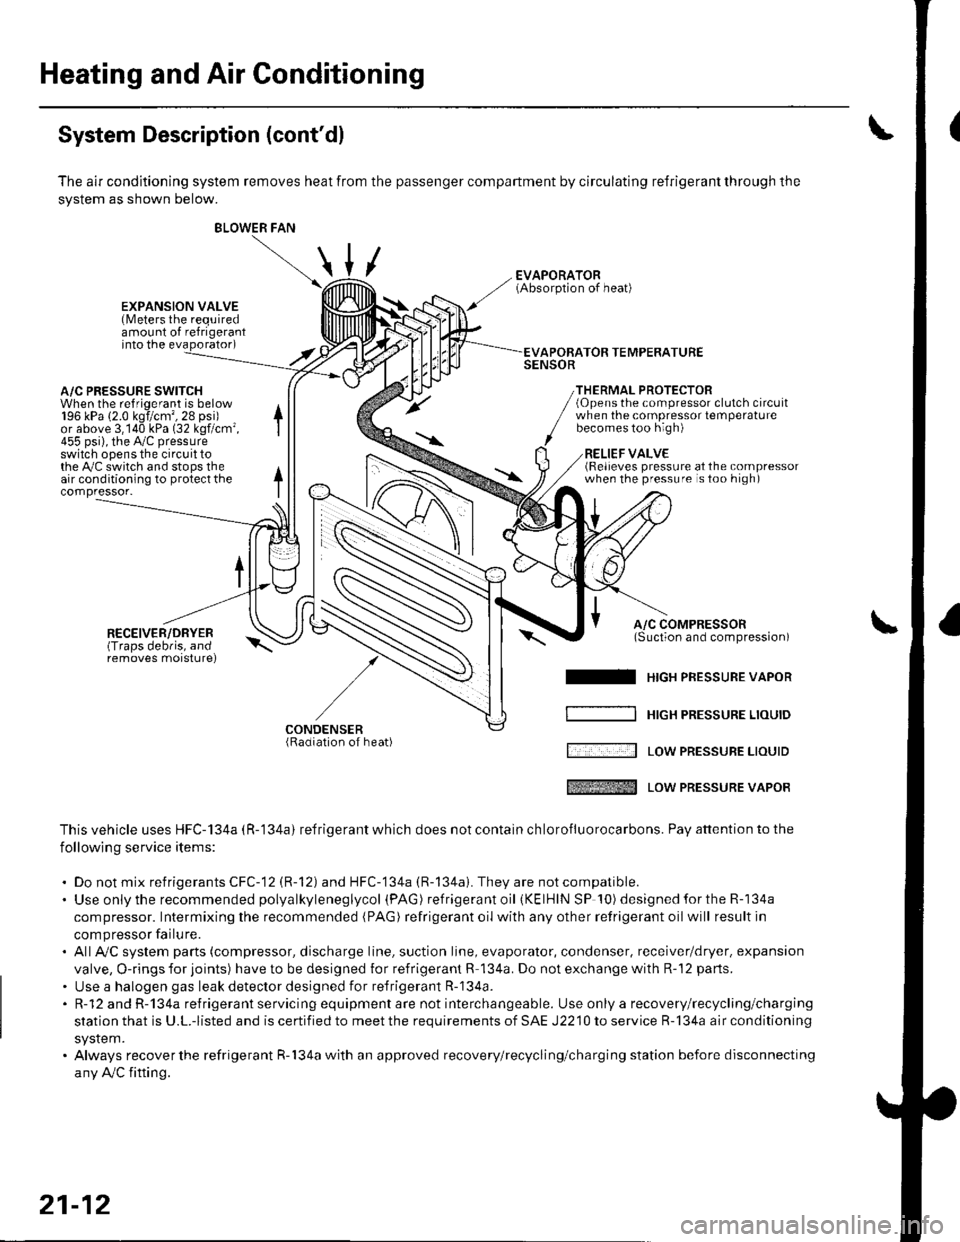 HONDA CIVIC 2003 7.G Workshop Manual Heating and Air Gonditioning
System Description (contdl
The air conditioning system removes heat from the passenger compartment by circulating refrigerant through the
system as shown below.
/
BLOWER 